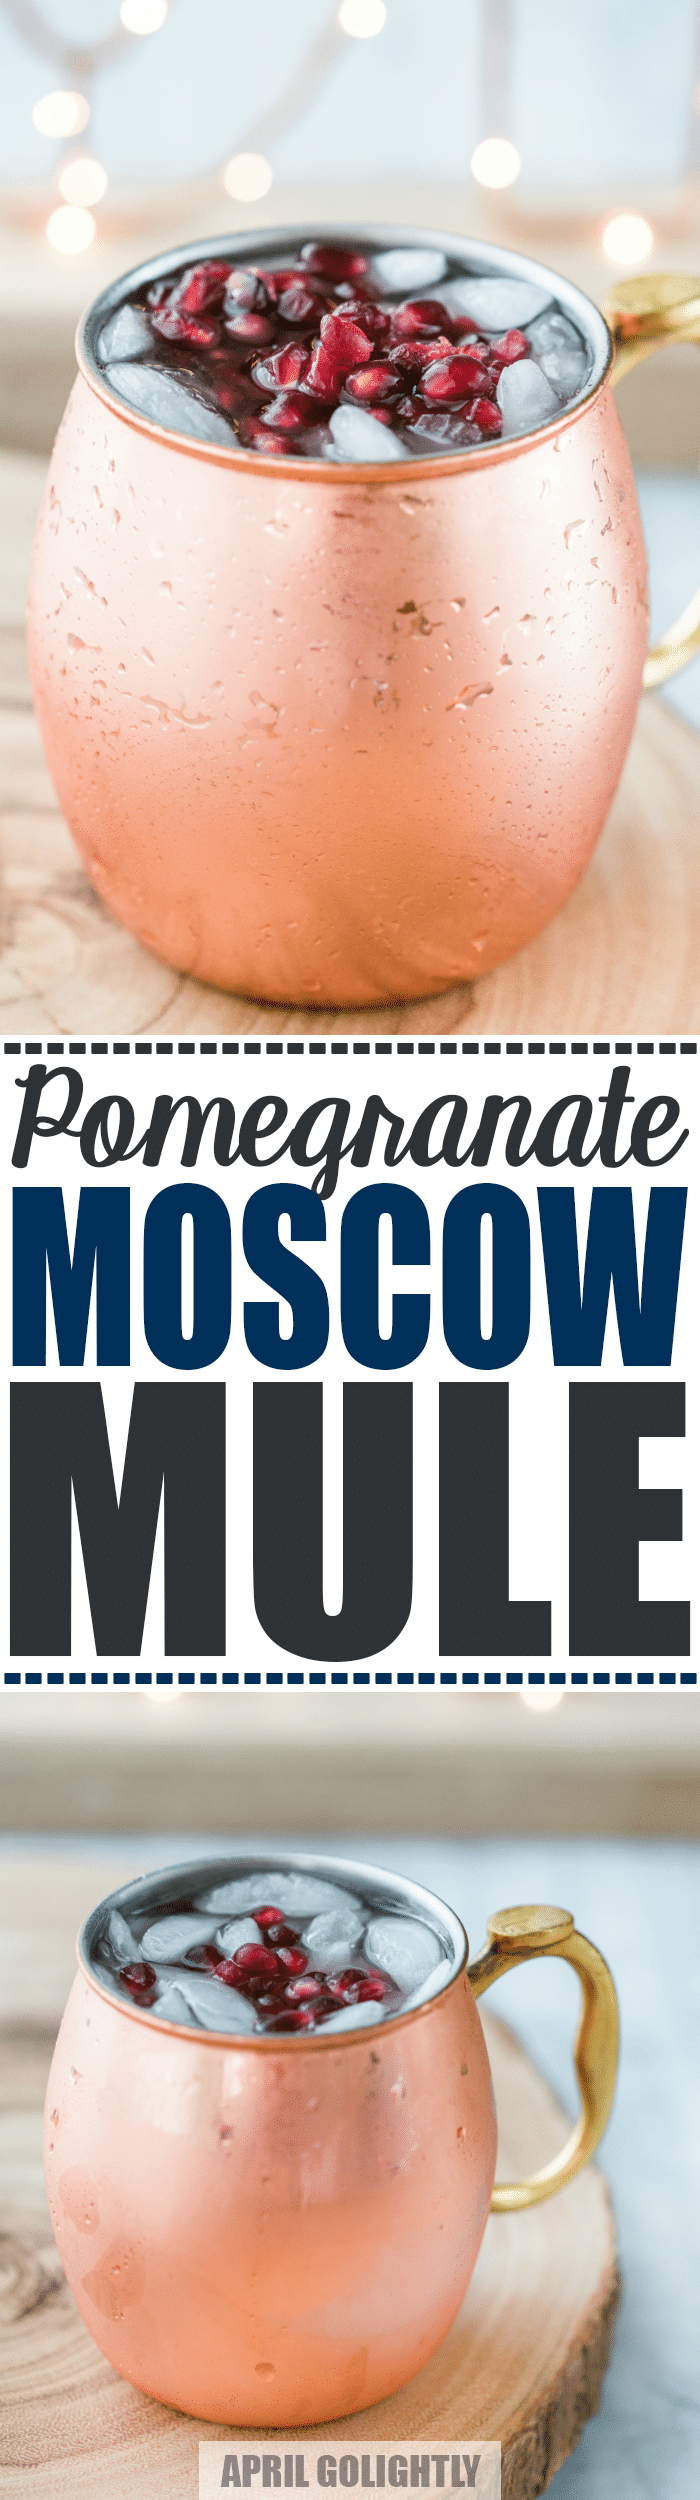 pomegranate-moscow-mule-4